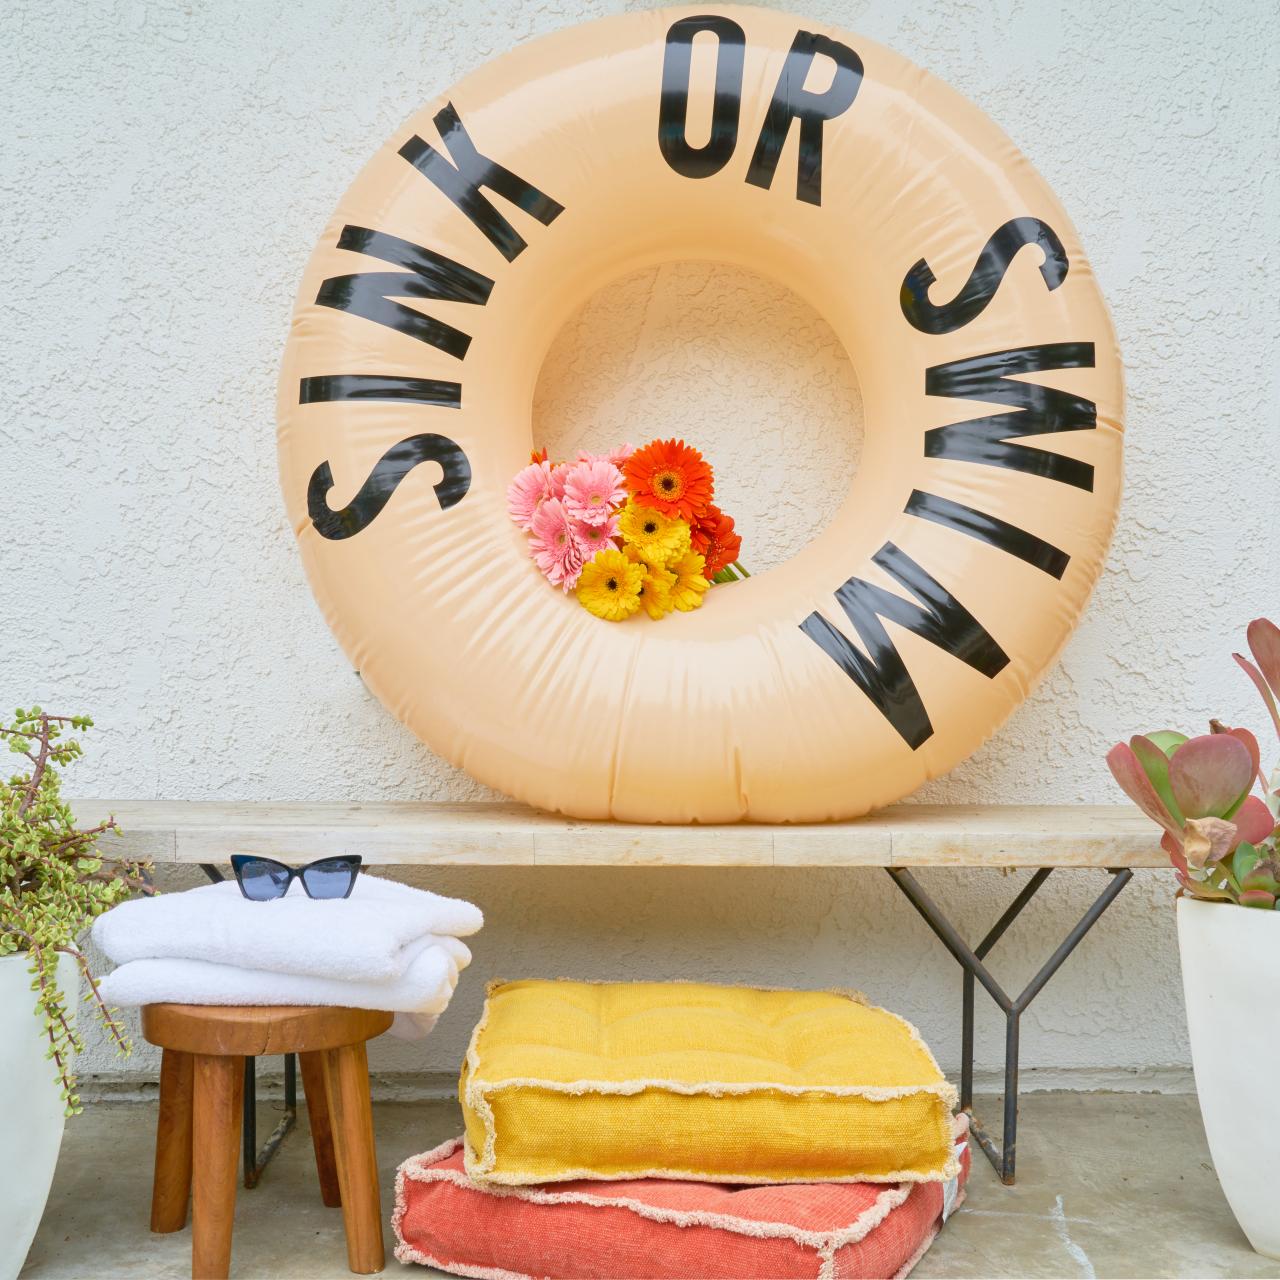 15 Fun-filled And Unforgettable Beach Party Ideas to Enjoy Summer Vibes